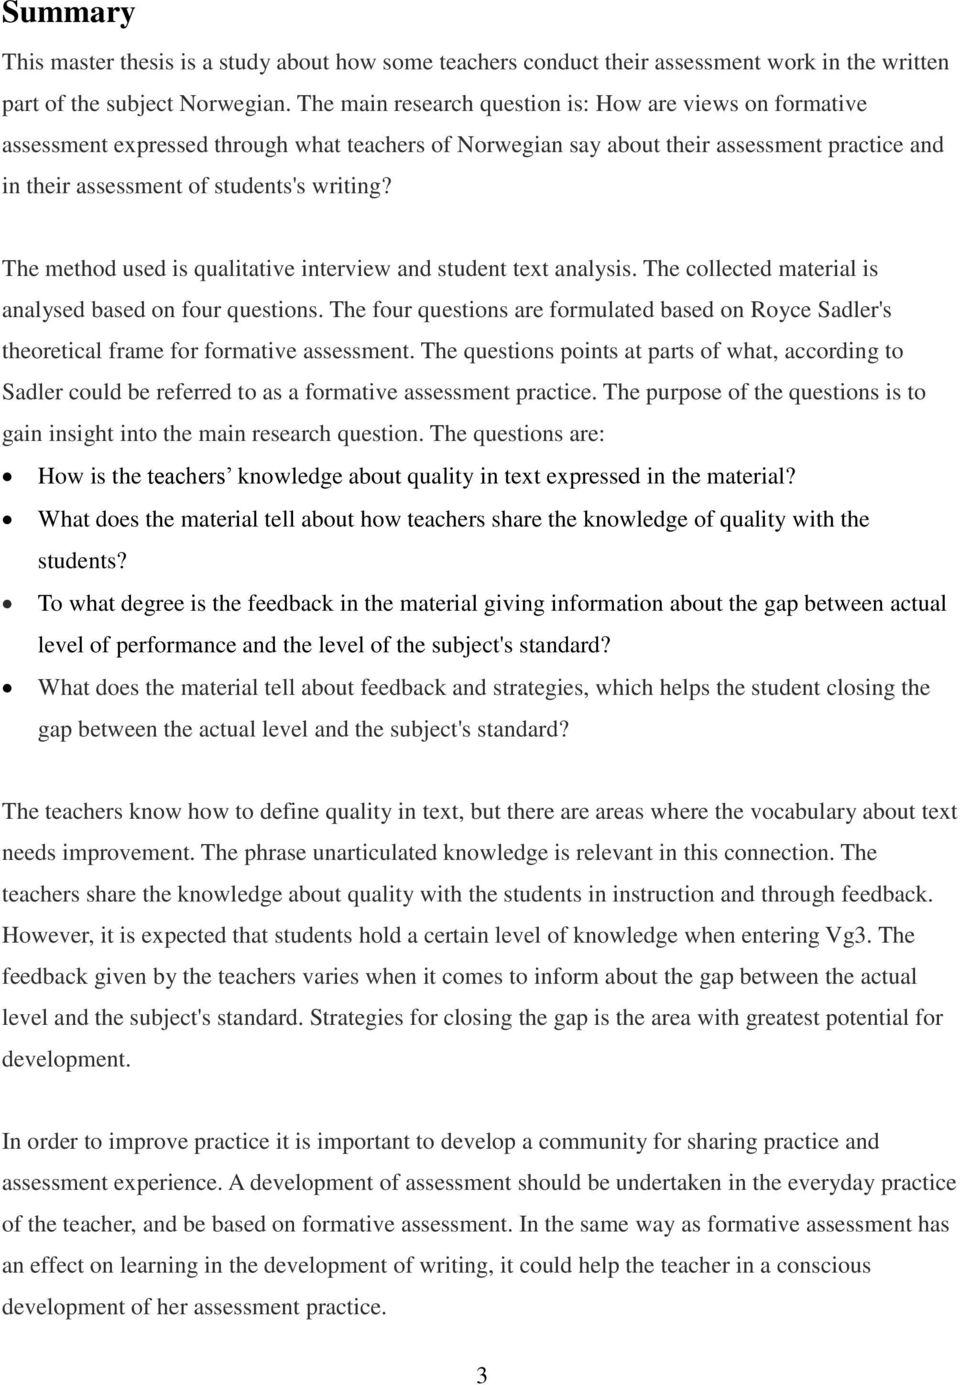 The method used is qualitative interview and student text analysis. The collected material is analysed based on four questions.